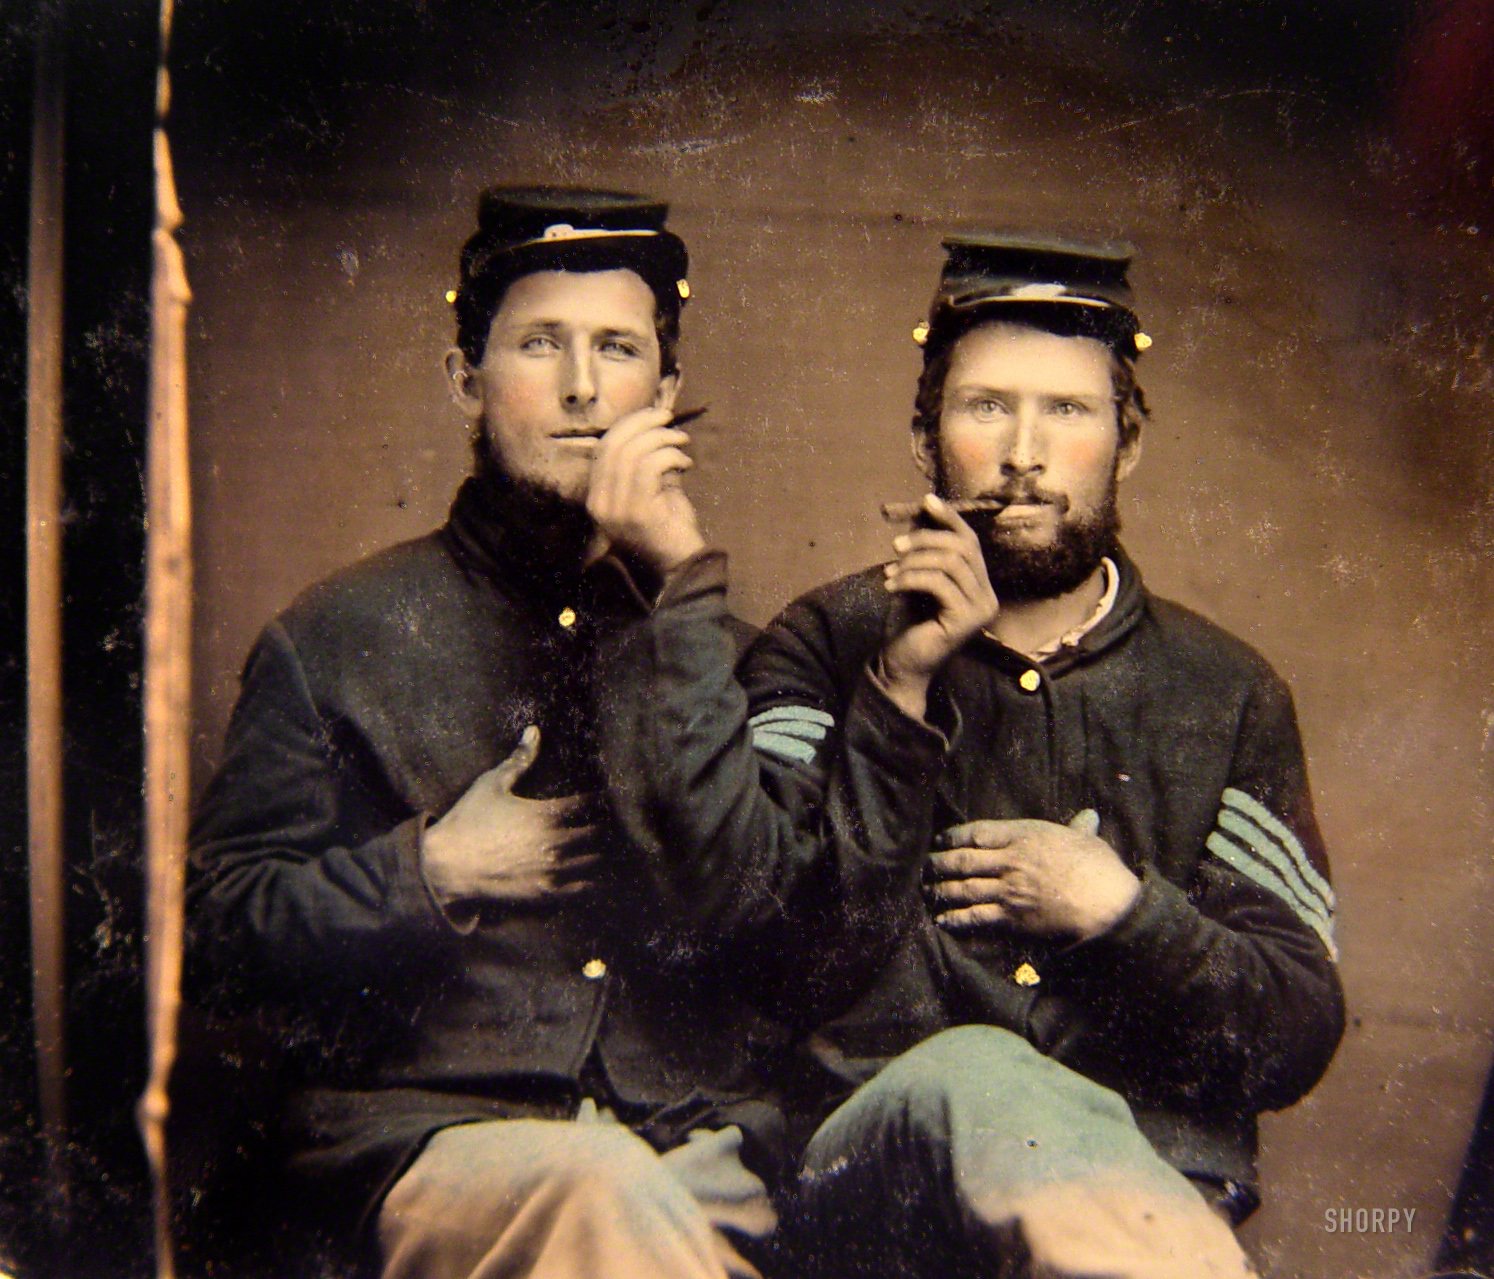 Guys gone wild, 1860s style. "Unidentified soldiers in Union uniforms holding cigars in each other's mouths." Ninth-plate tintype, hand-colored. Liljenquist Family Collection of Civil War Photographs, Library of Congress. View full size.